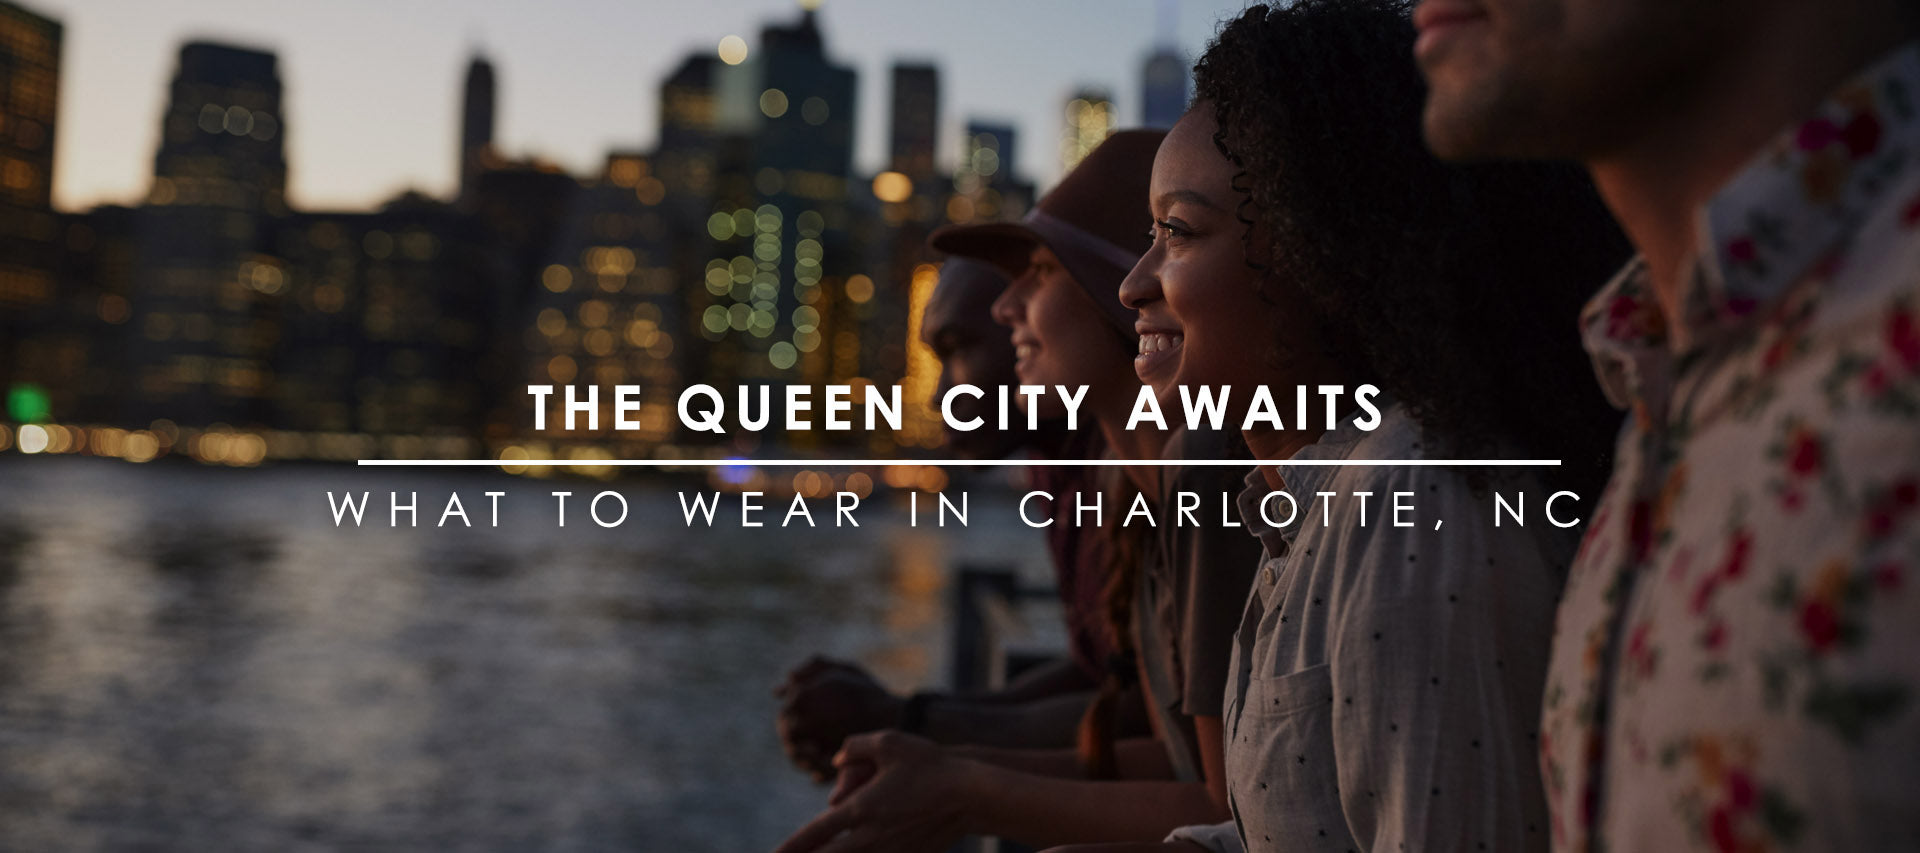 What to Wear in Charlotte, NC